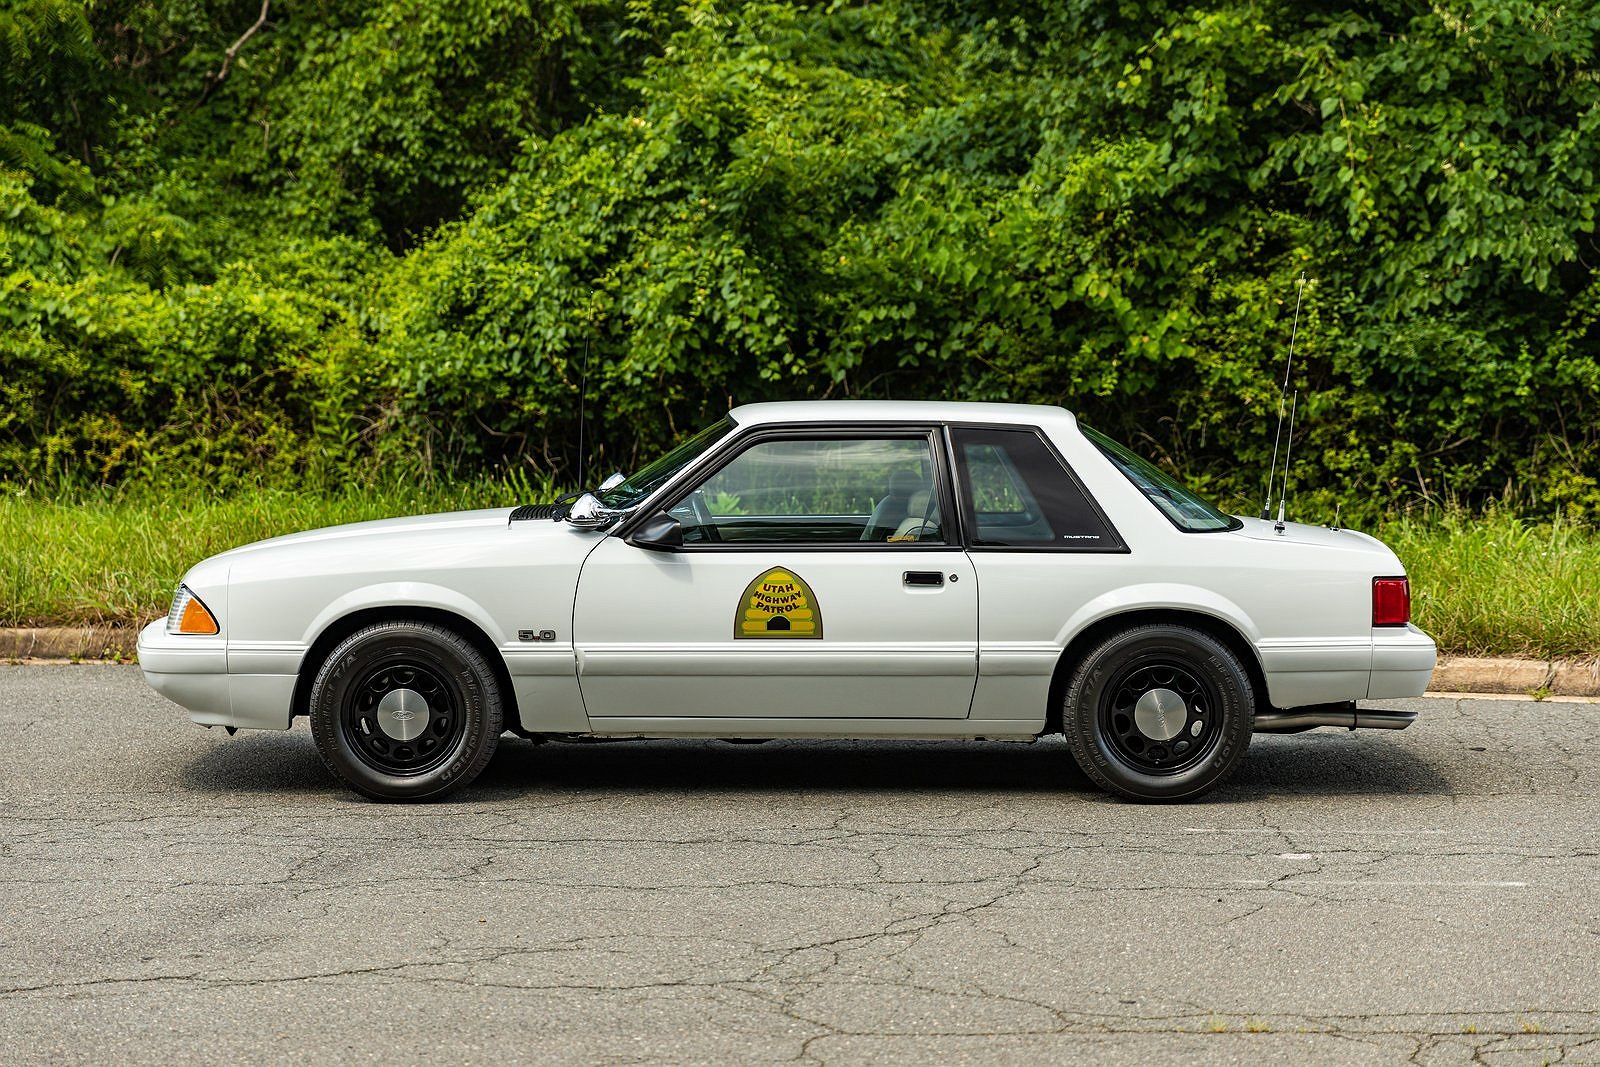 1991 Ford Mustang LX image 60